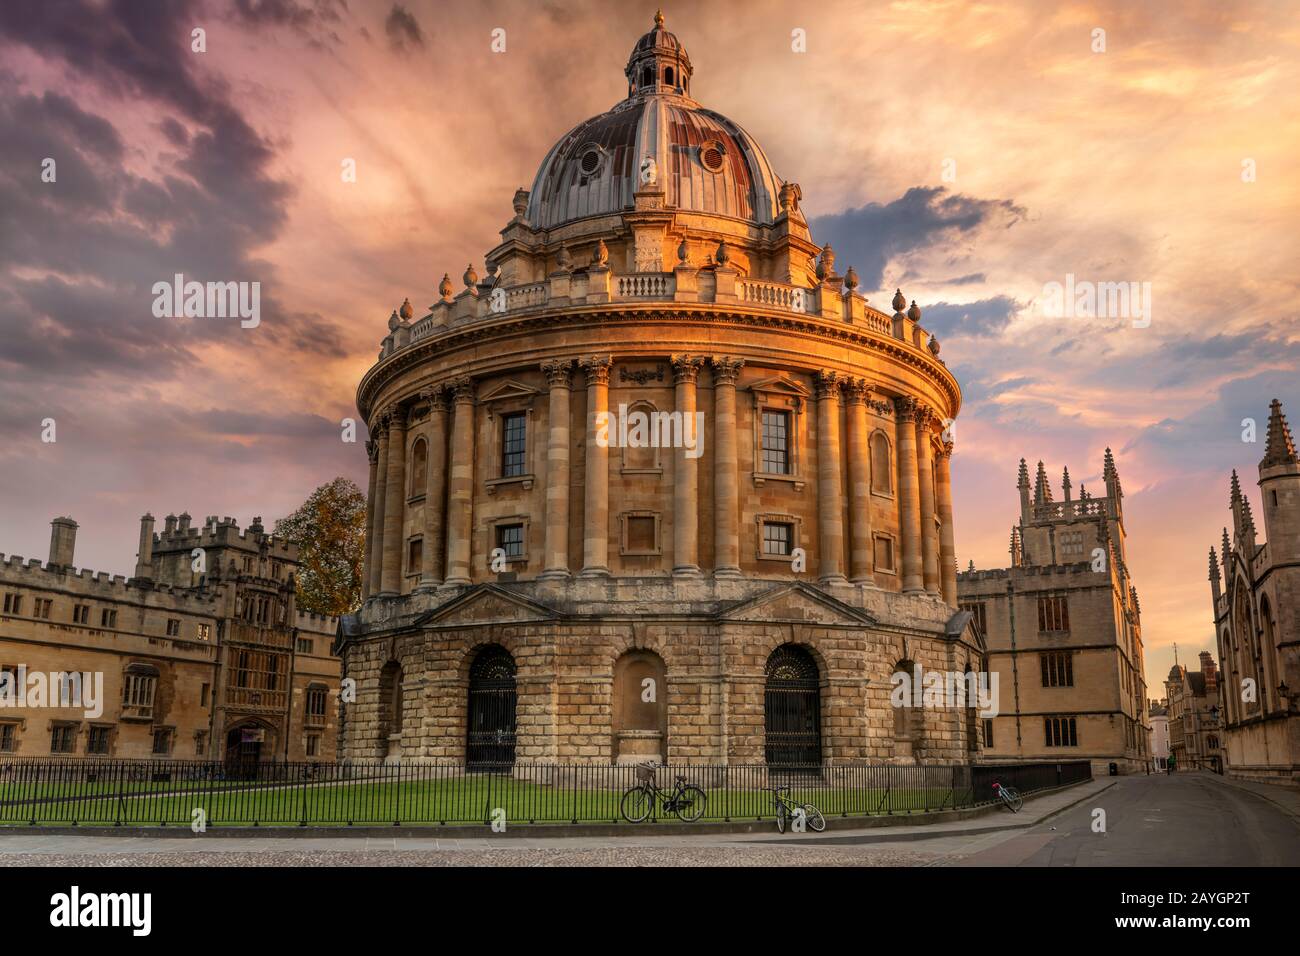 The Radcliffe Camera is a building of Oxford University, designed by James Gibbs in the neo-classical style. The famous landmark building in the centr Stock Photo